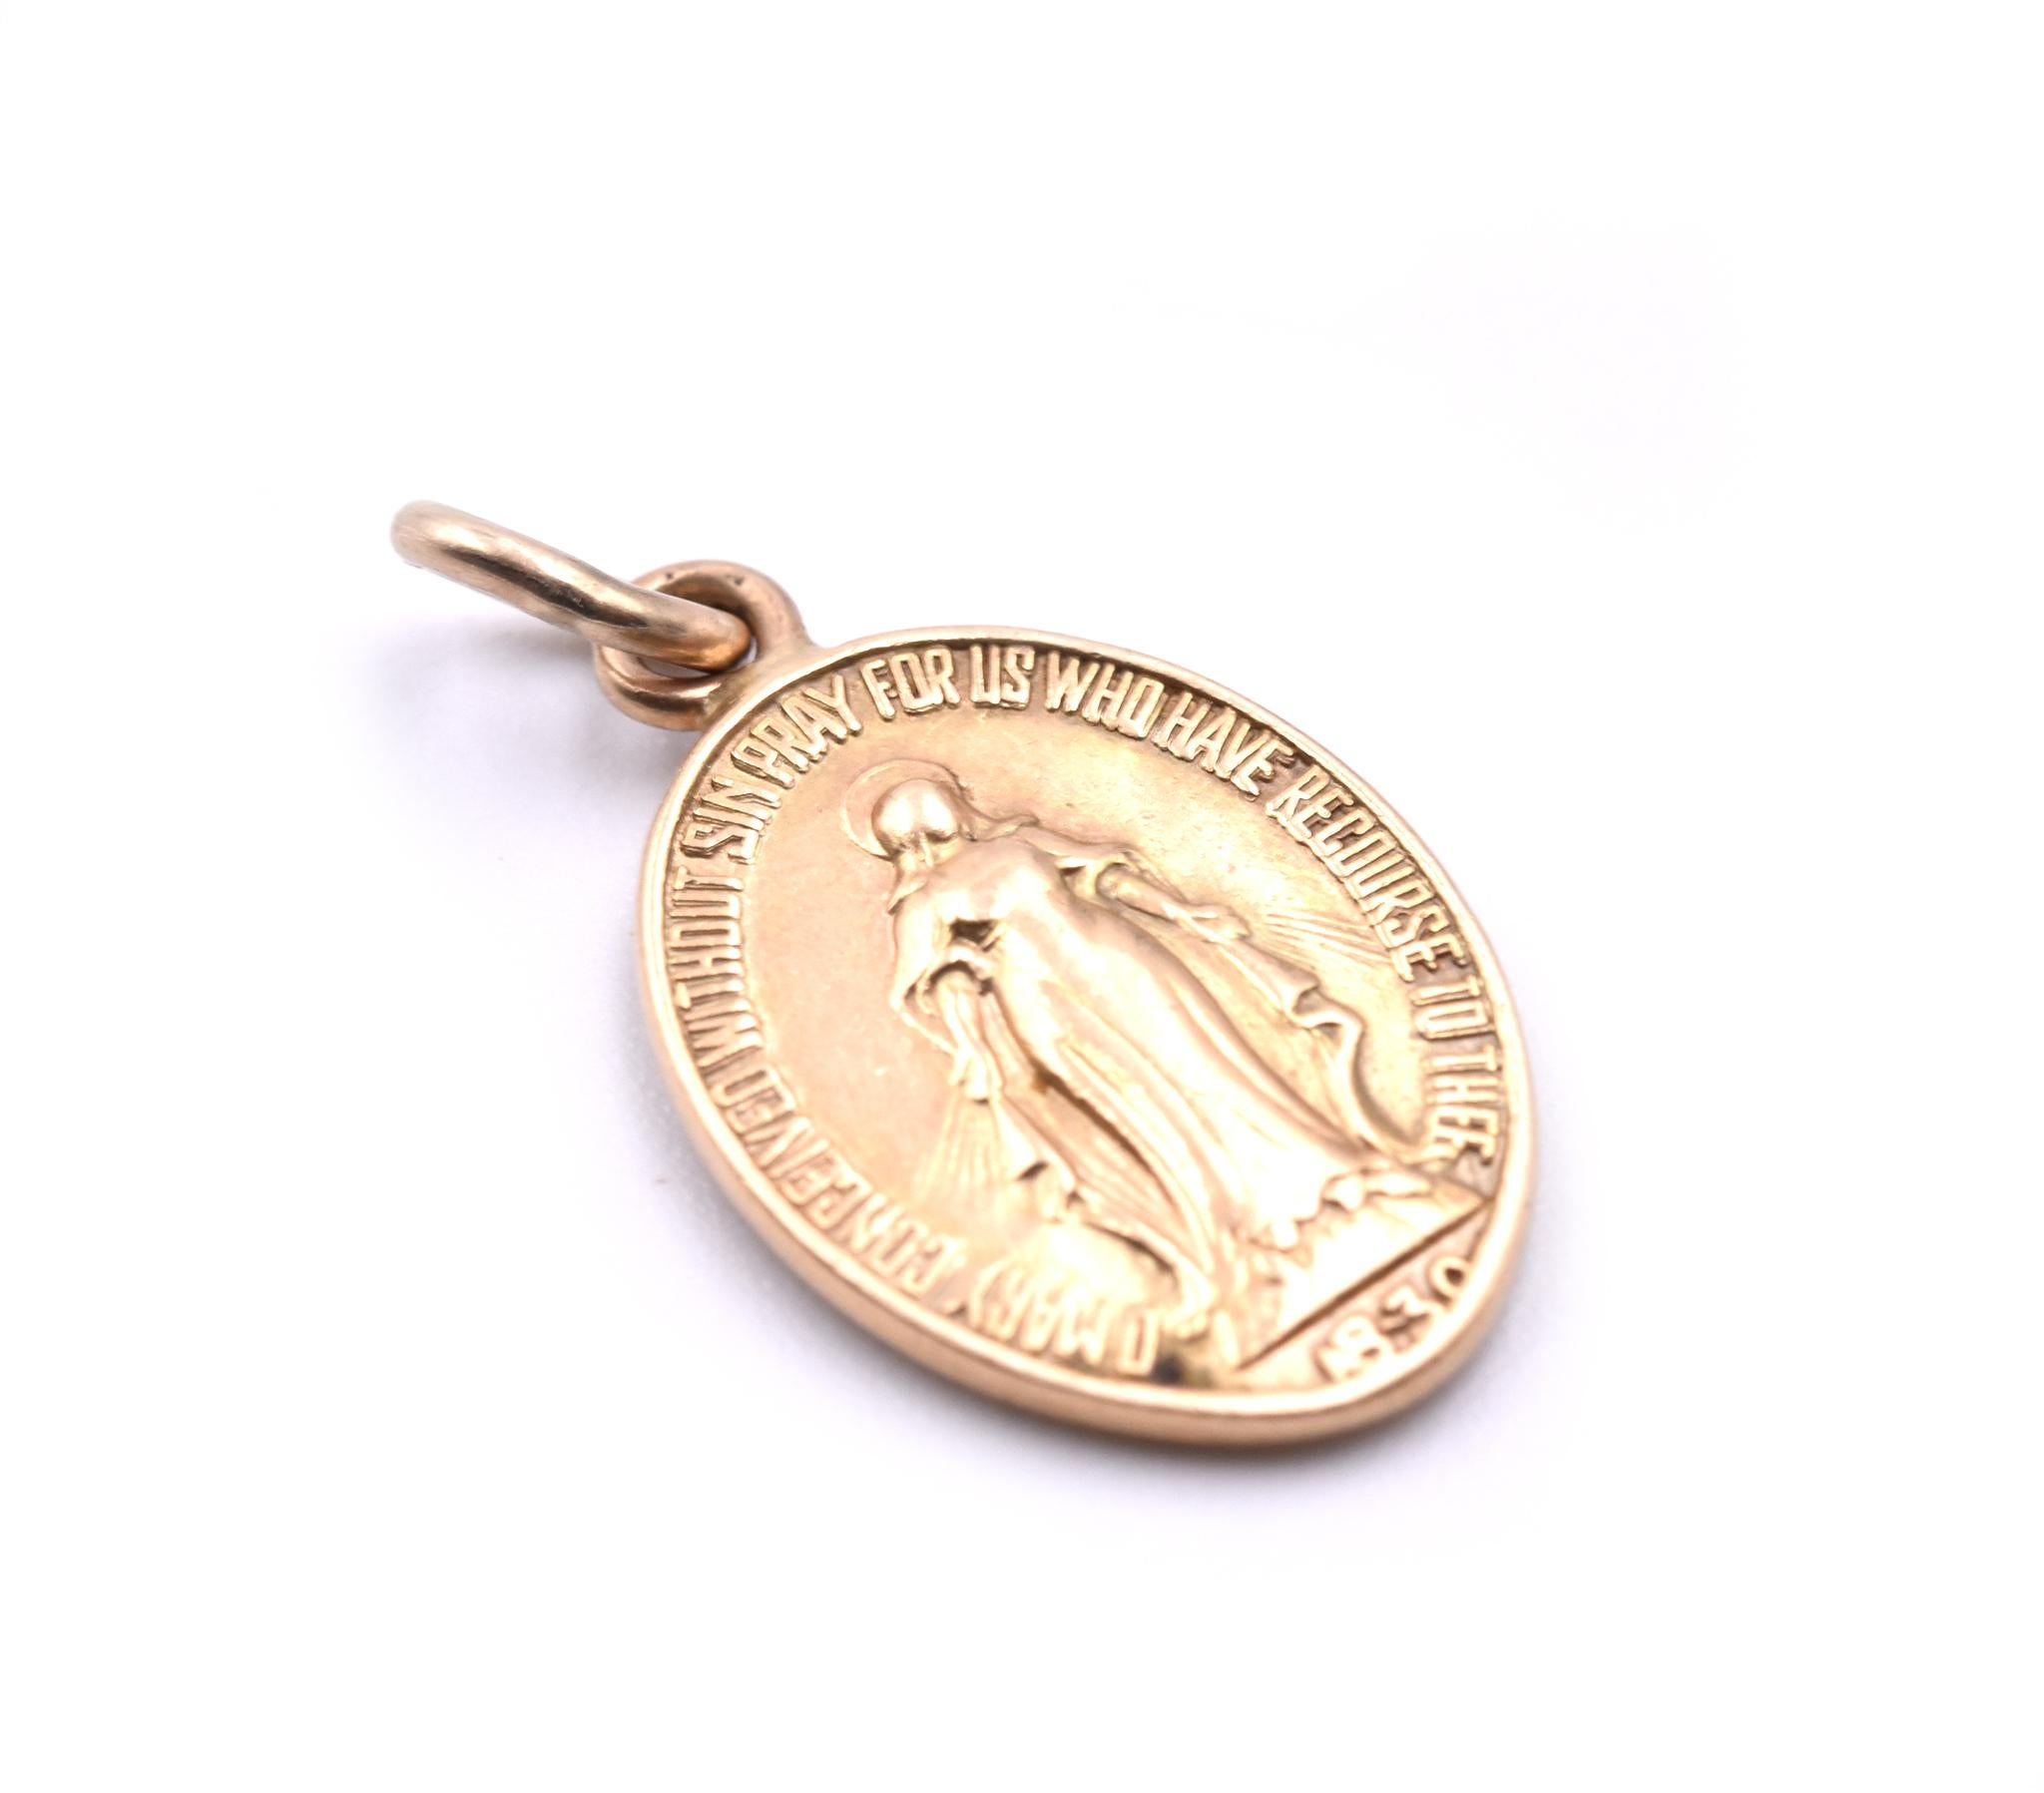 Designer: custom design
Material: 14k yellow gold 
Dimensions: pendant is 11.88mm by 22mm including vail
Weight:  2.41 grams
